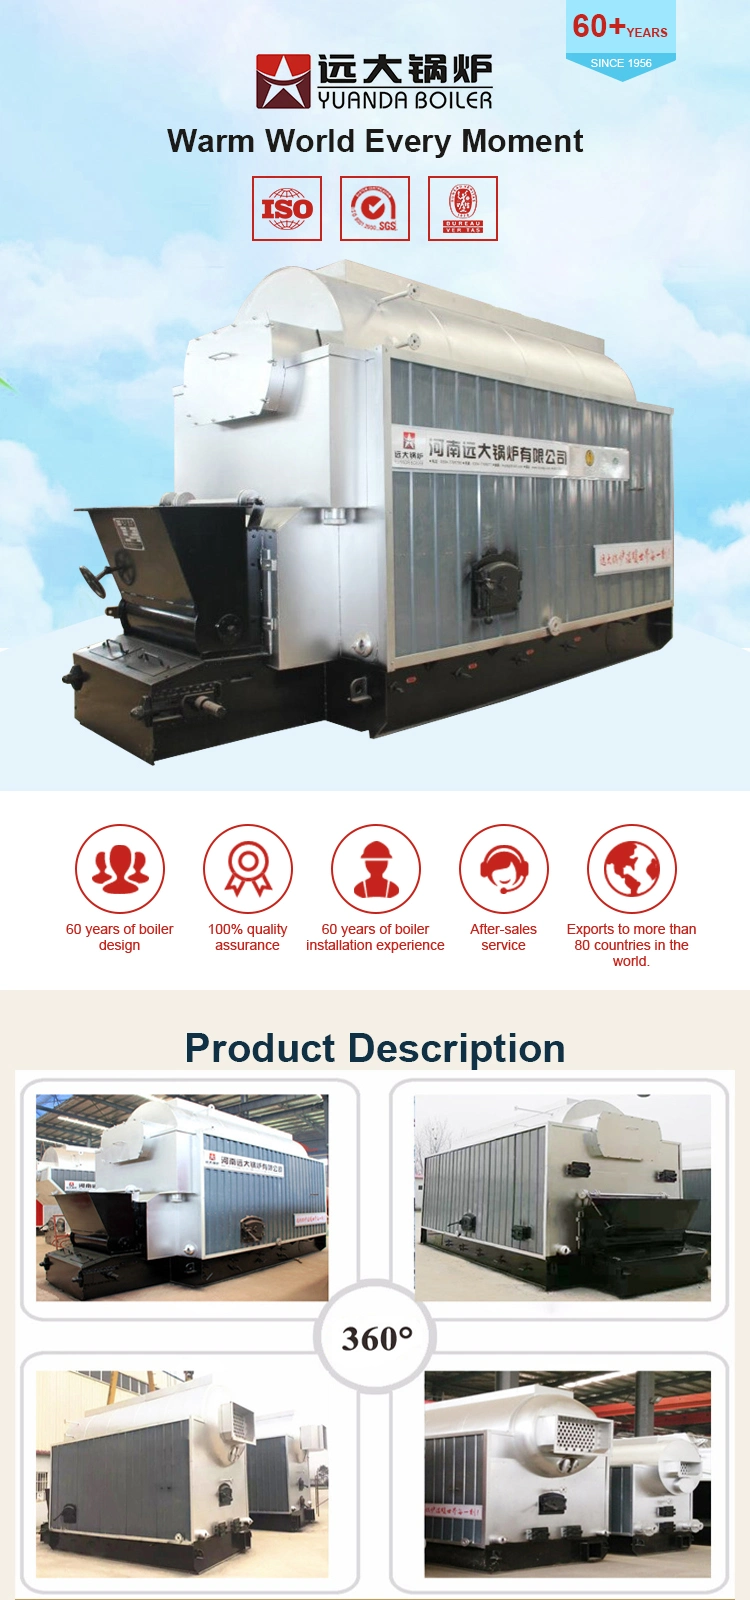 China Lead Factory Coal Based Steam Boiler Paper Mills